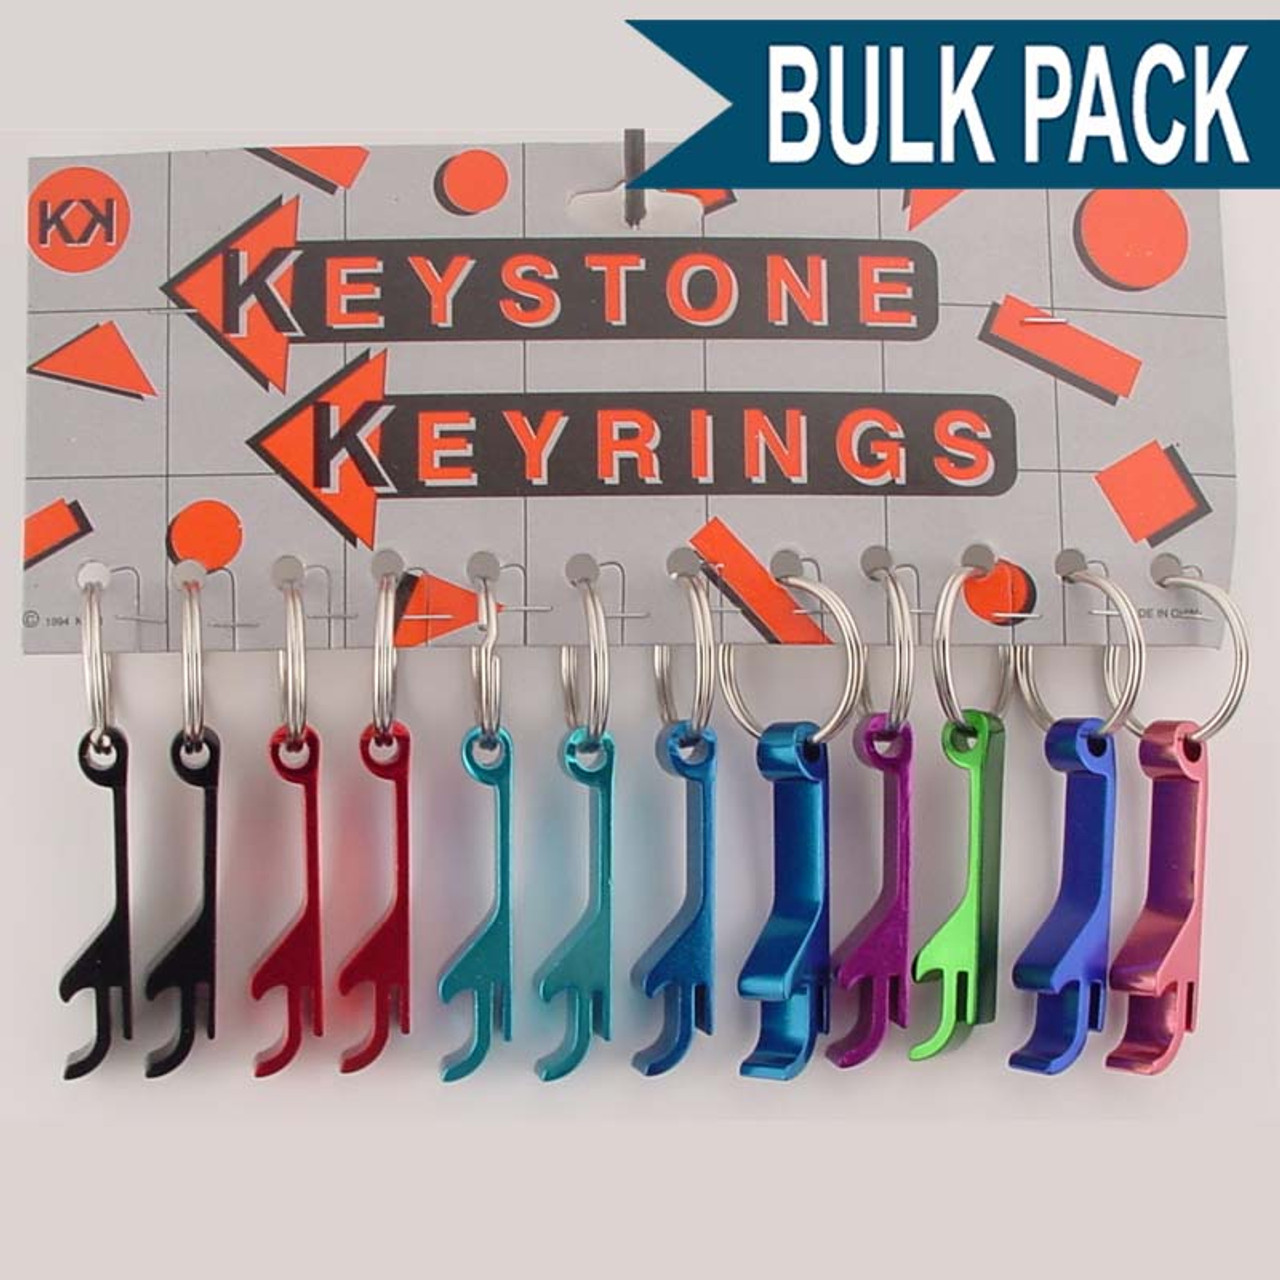 Shop for and Buy Bottle Opener Key Chain Top Popper - Bulk Pack at  . Large selection and bulk discounts available.